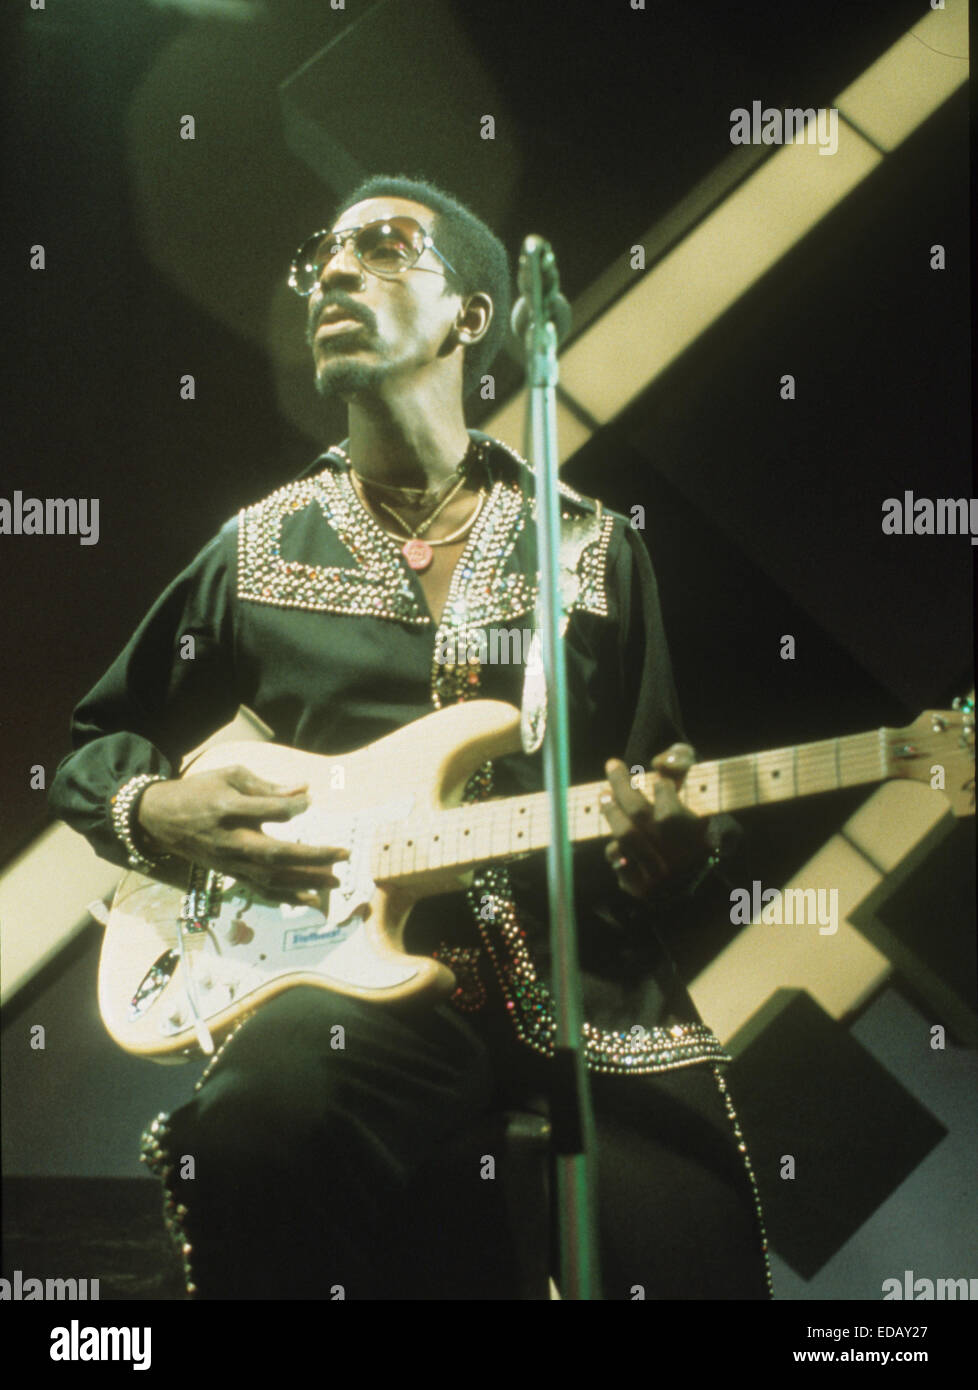 IKE TURNER (1931-2007) US rock musician about 1972 Stock Photo